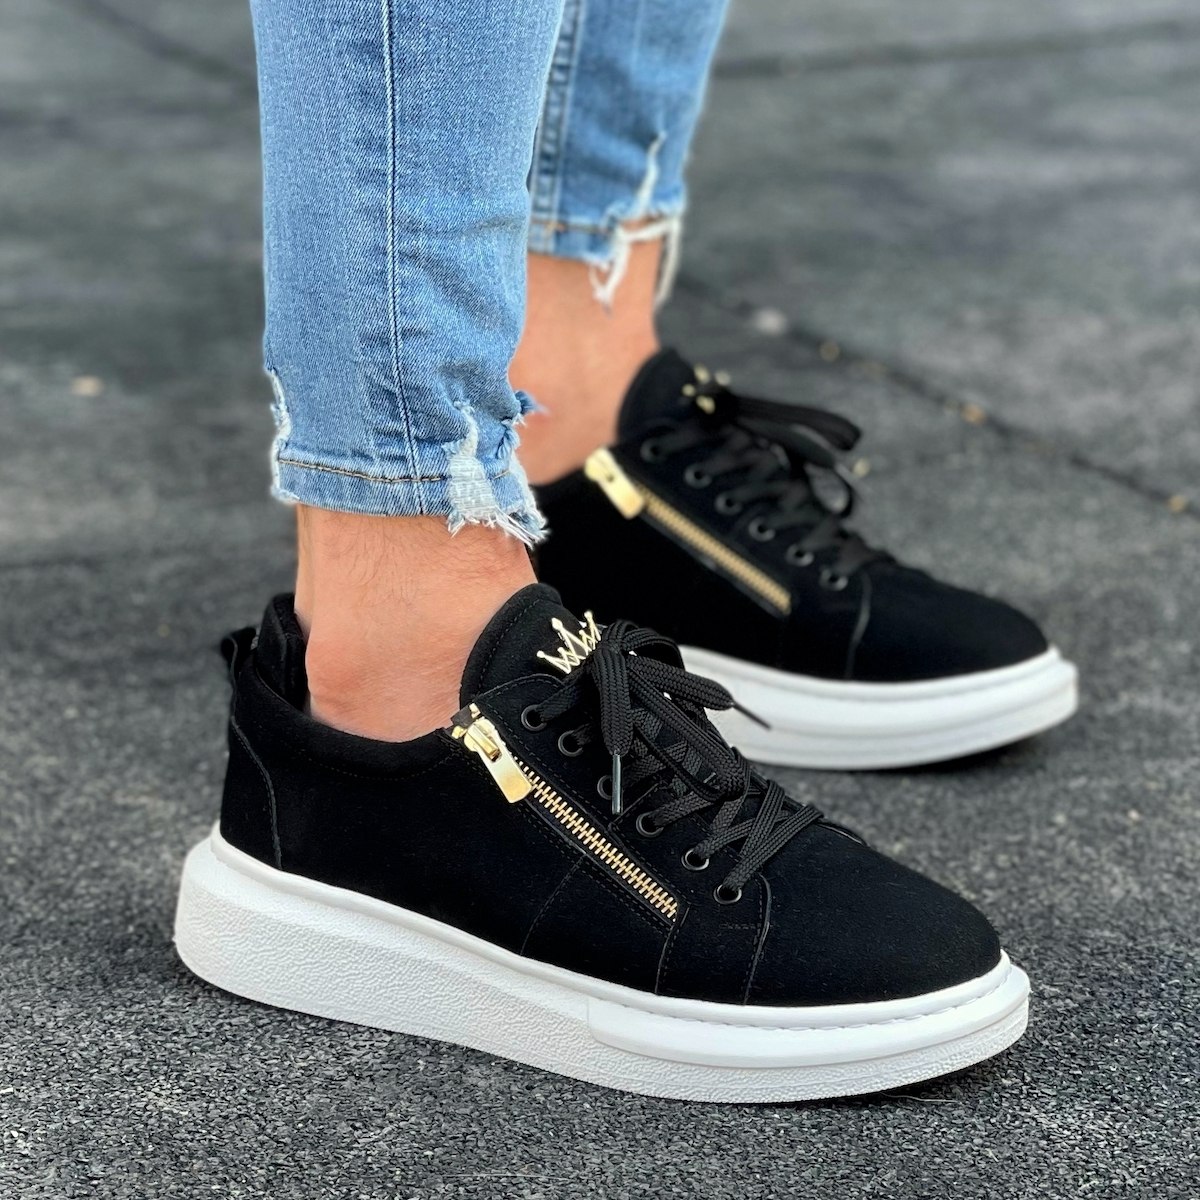 Chunky Suede Sneakers Gold Zipper Designer Shoes Black | Martin Valen